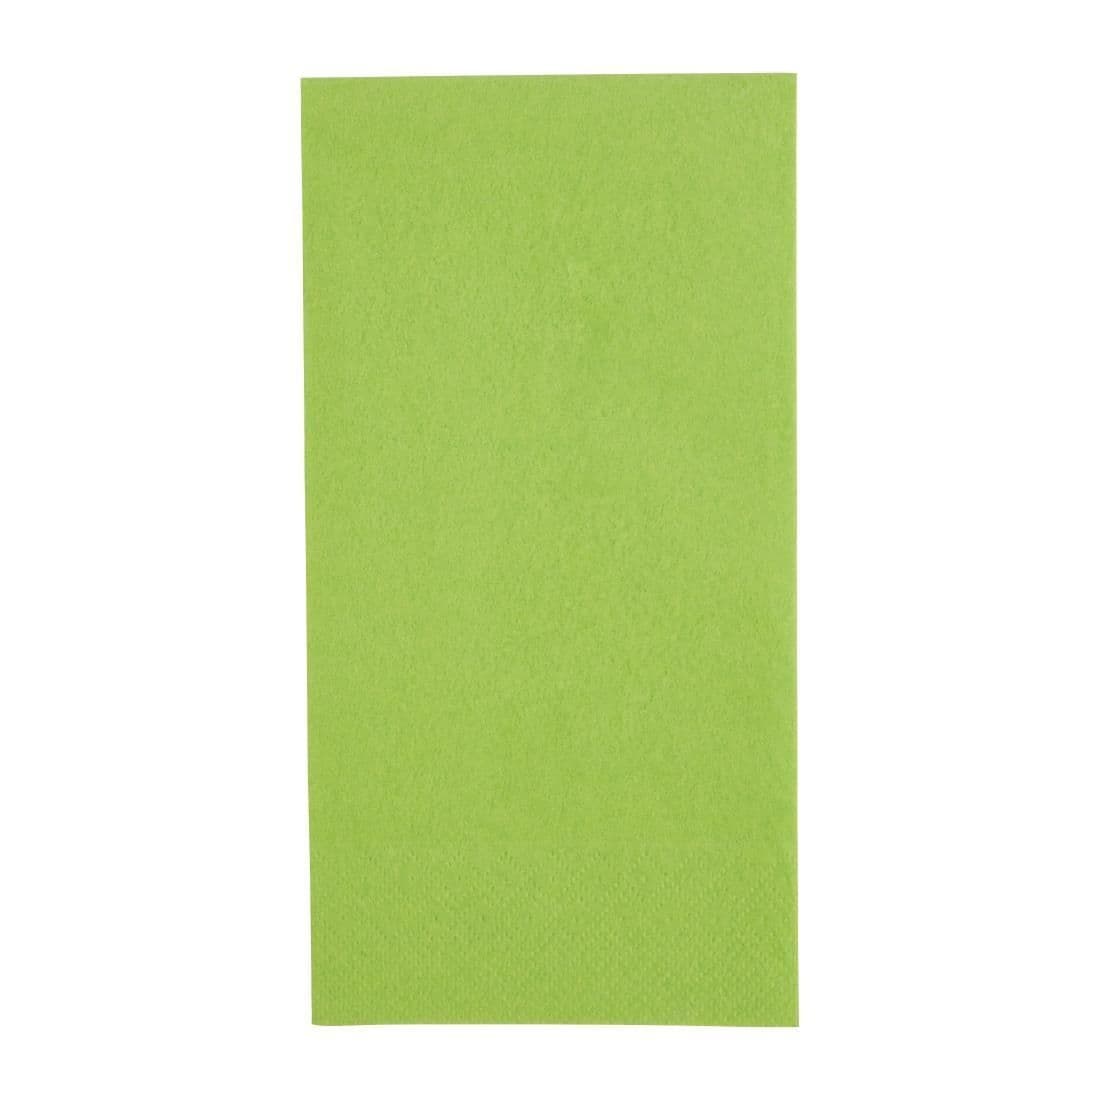 FE228 Fiesta Lunch Napkins Kiwi 330mm (Pack of 2000) JD Catering Equipment Solutions Ltd